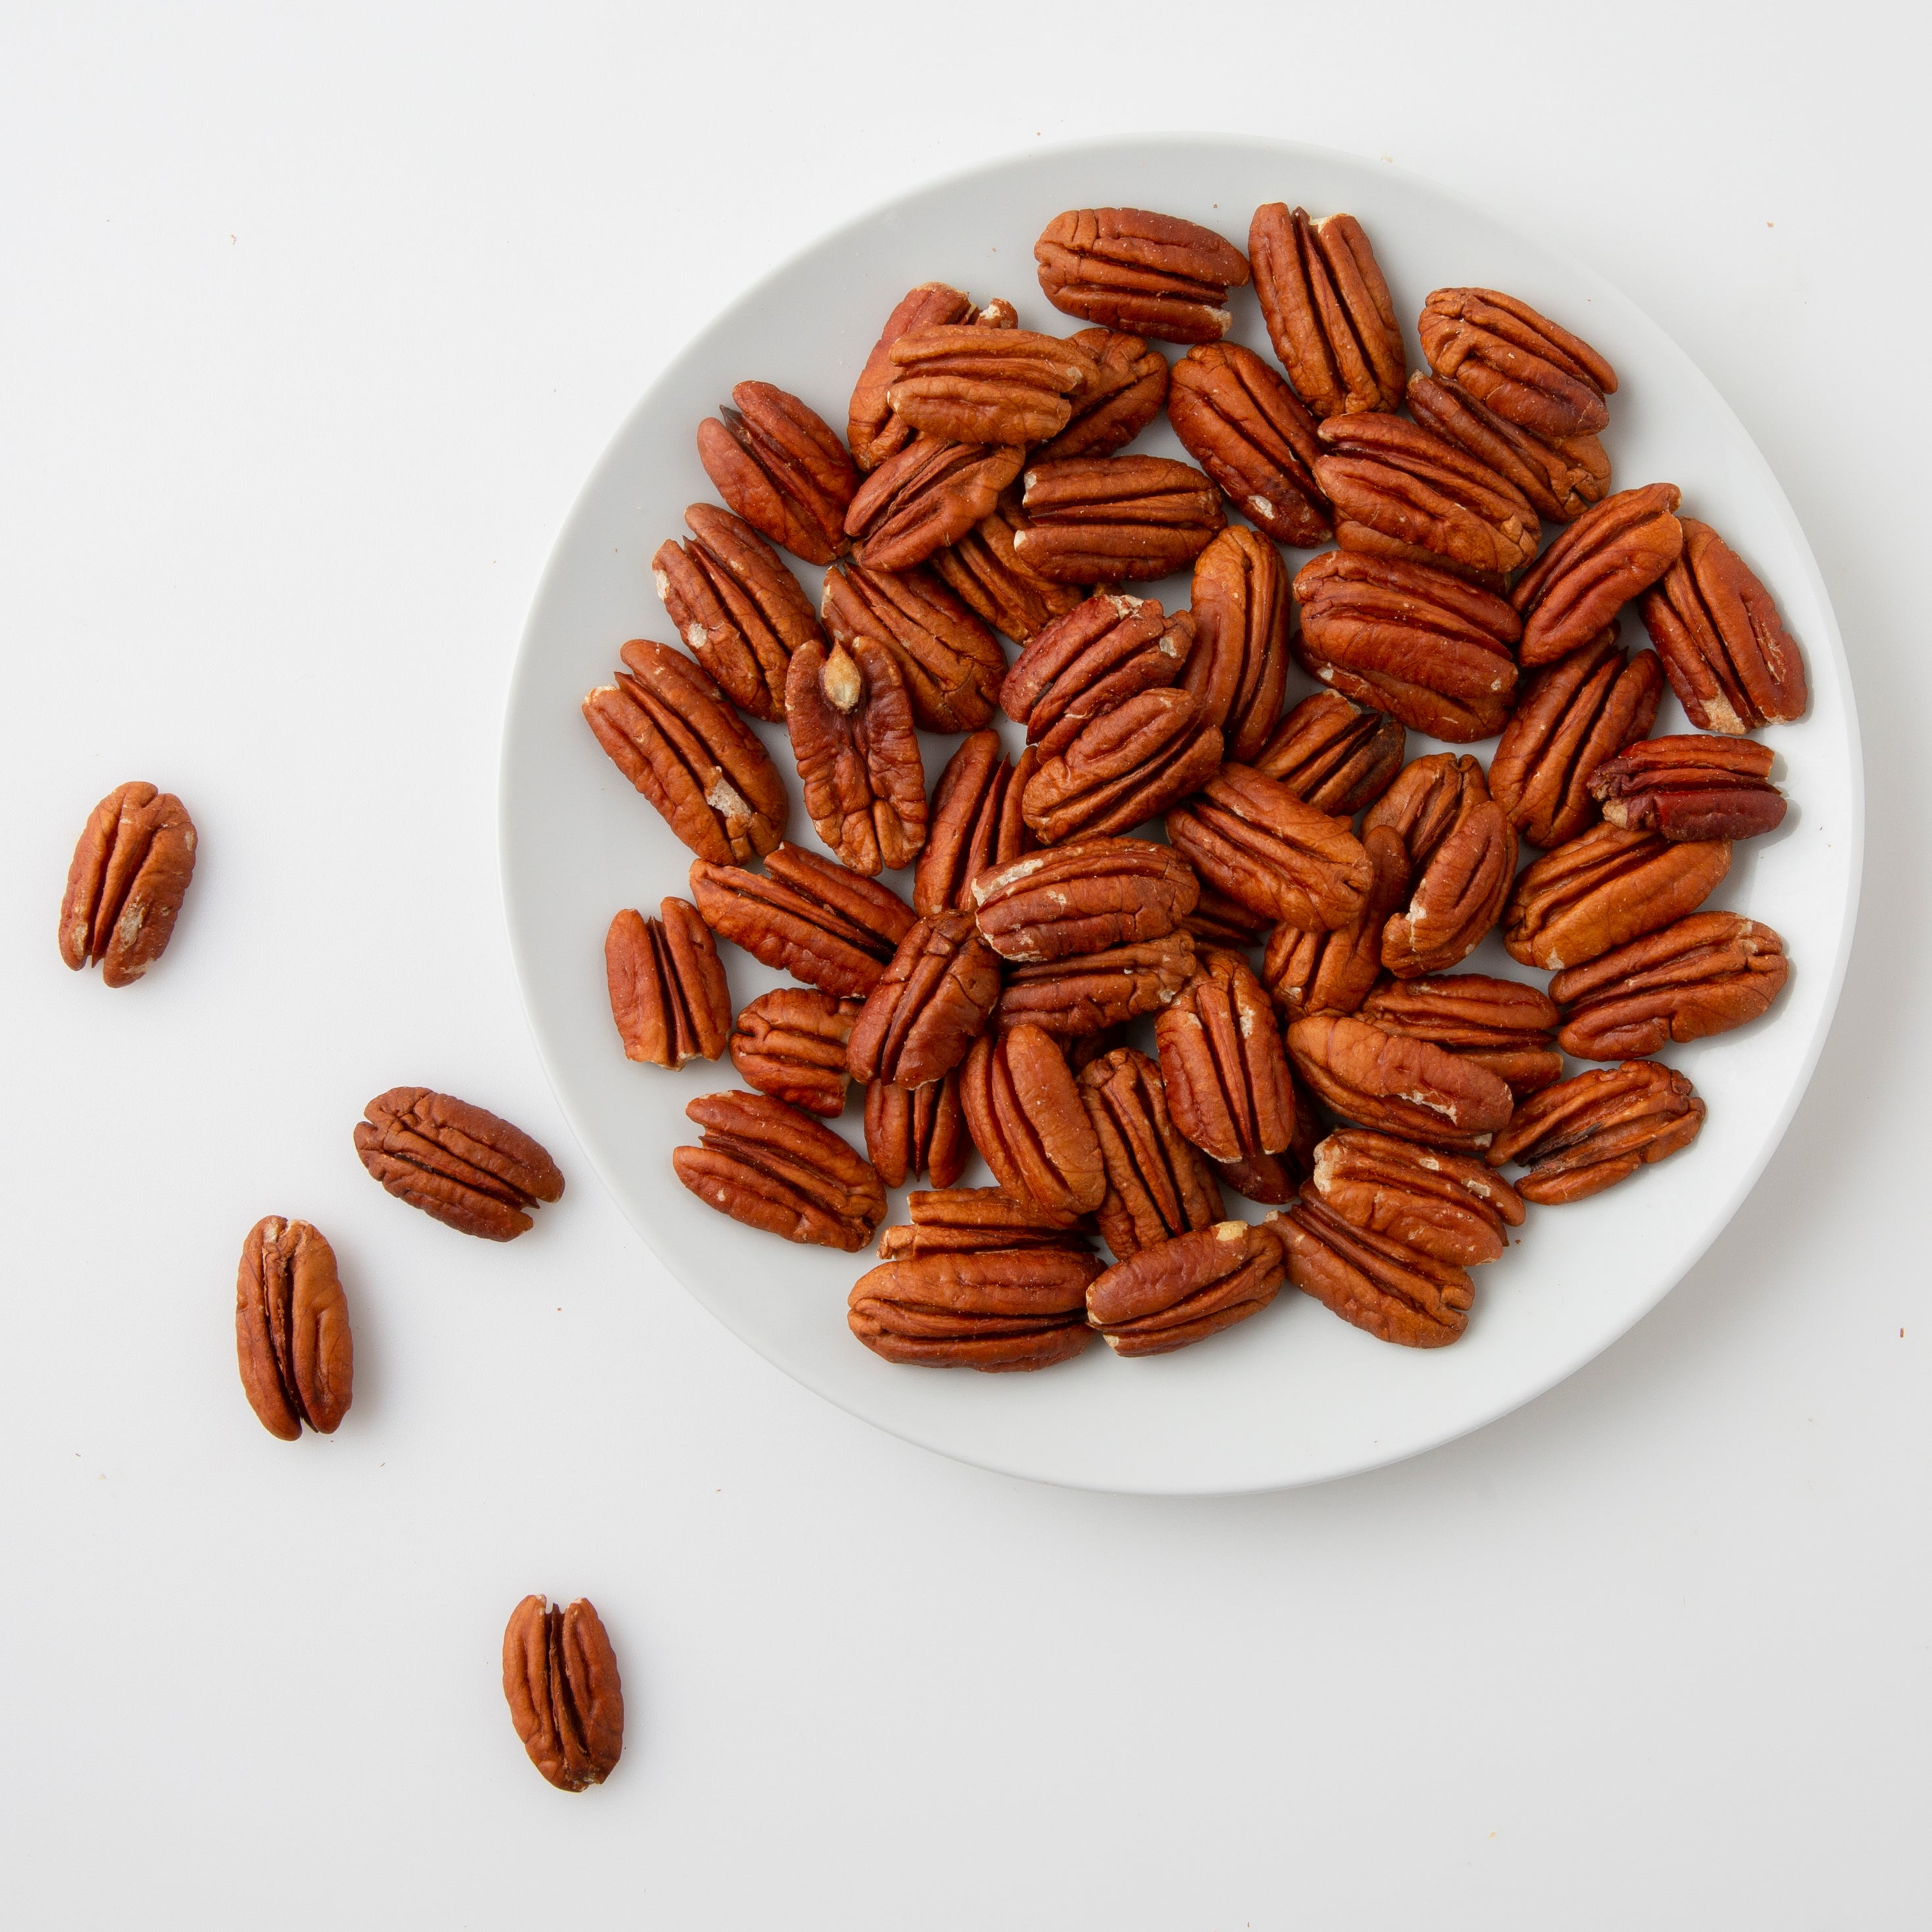 Raw Pecan Nuts (Raw Nuts) Image 3 - Naked Foods